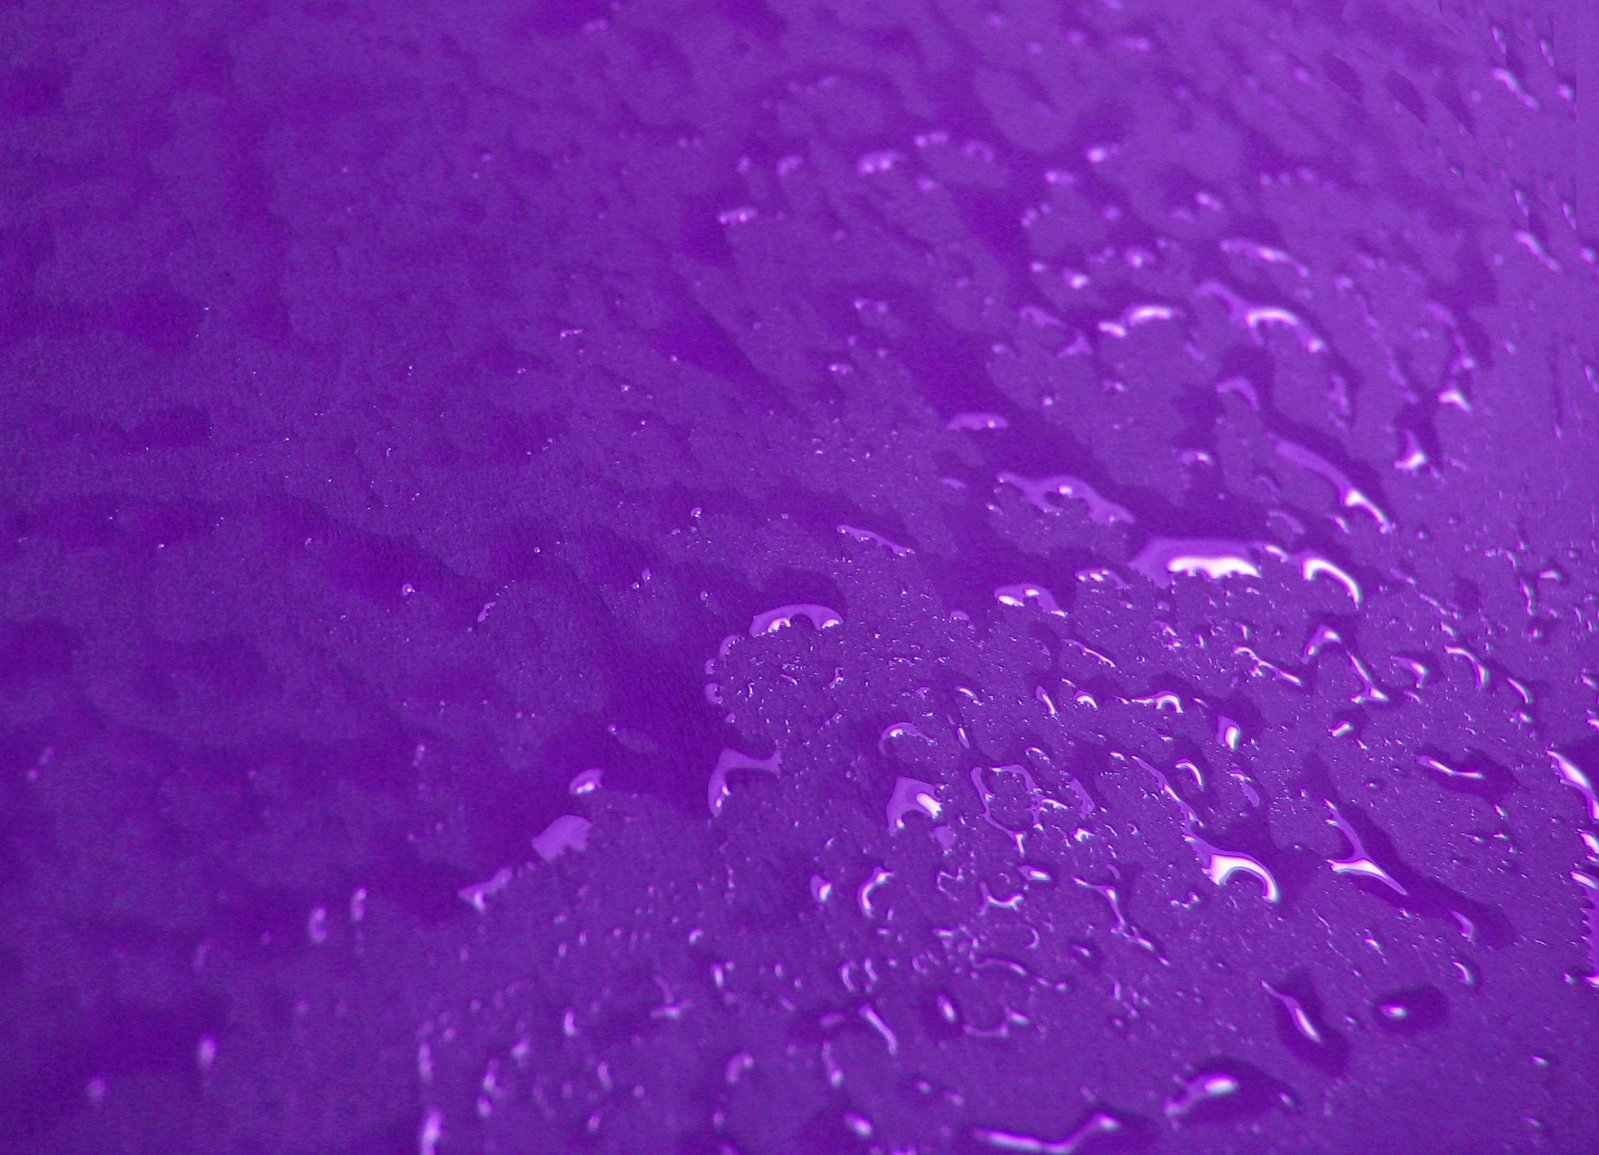 drops of water on purple background showing bright colors